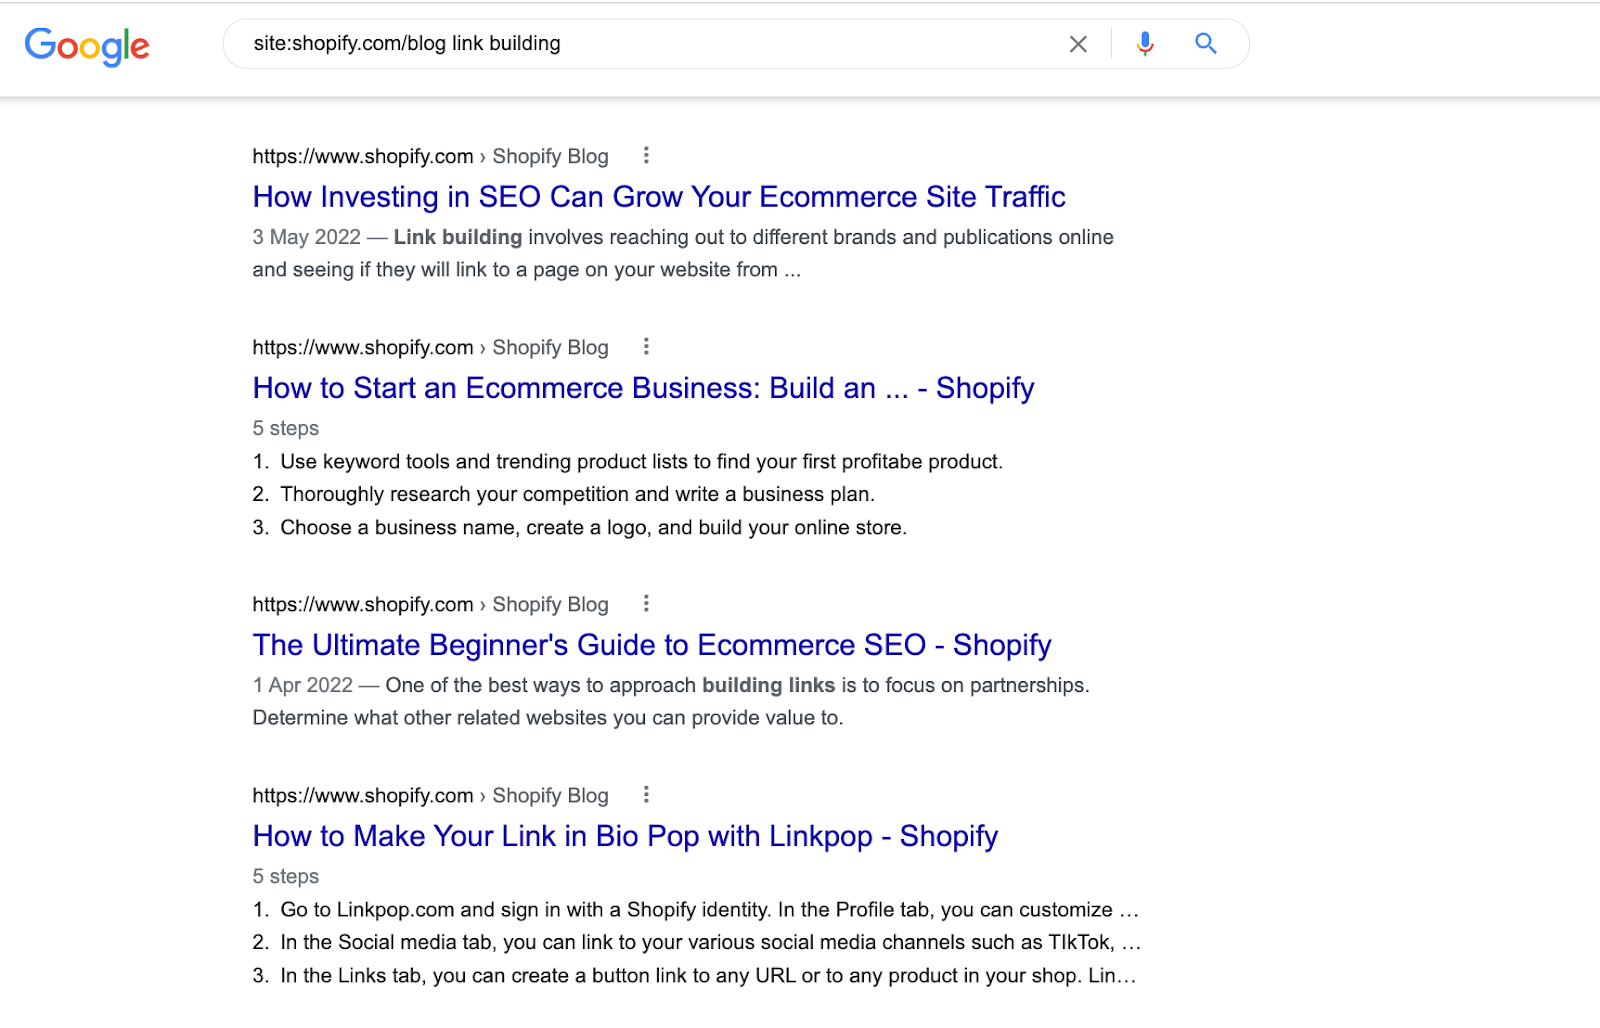 Google search results for “linkbuilding” on the Shopify blog.